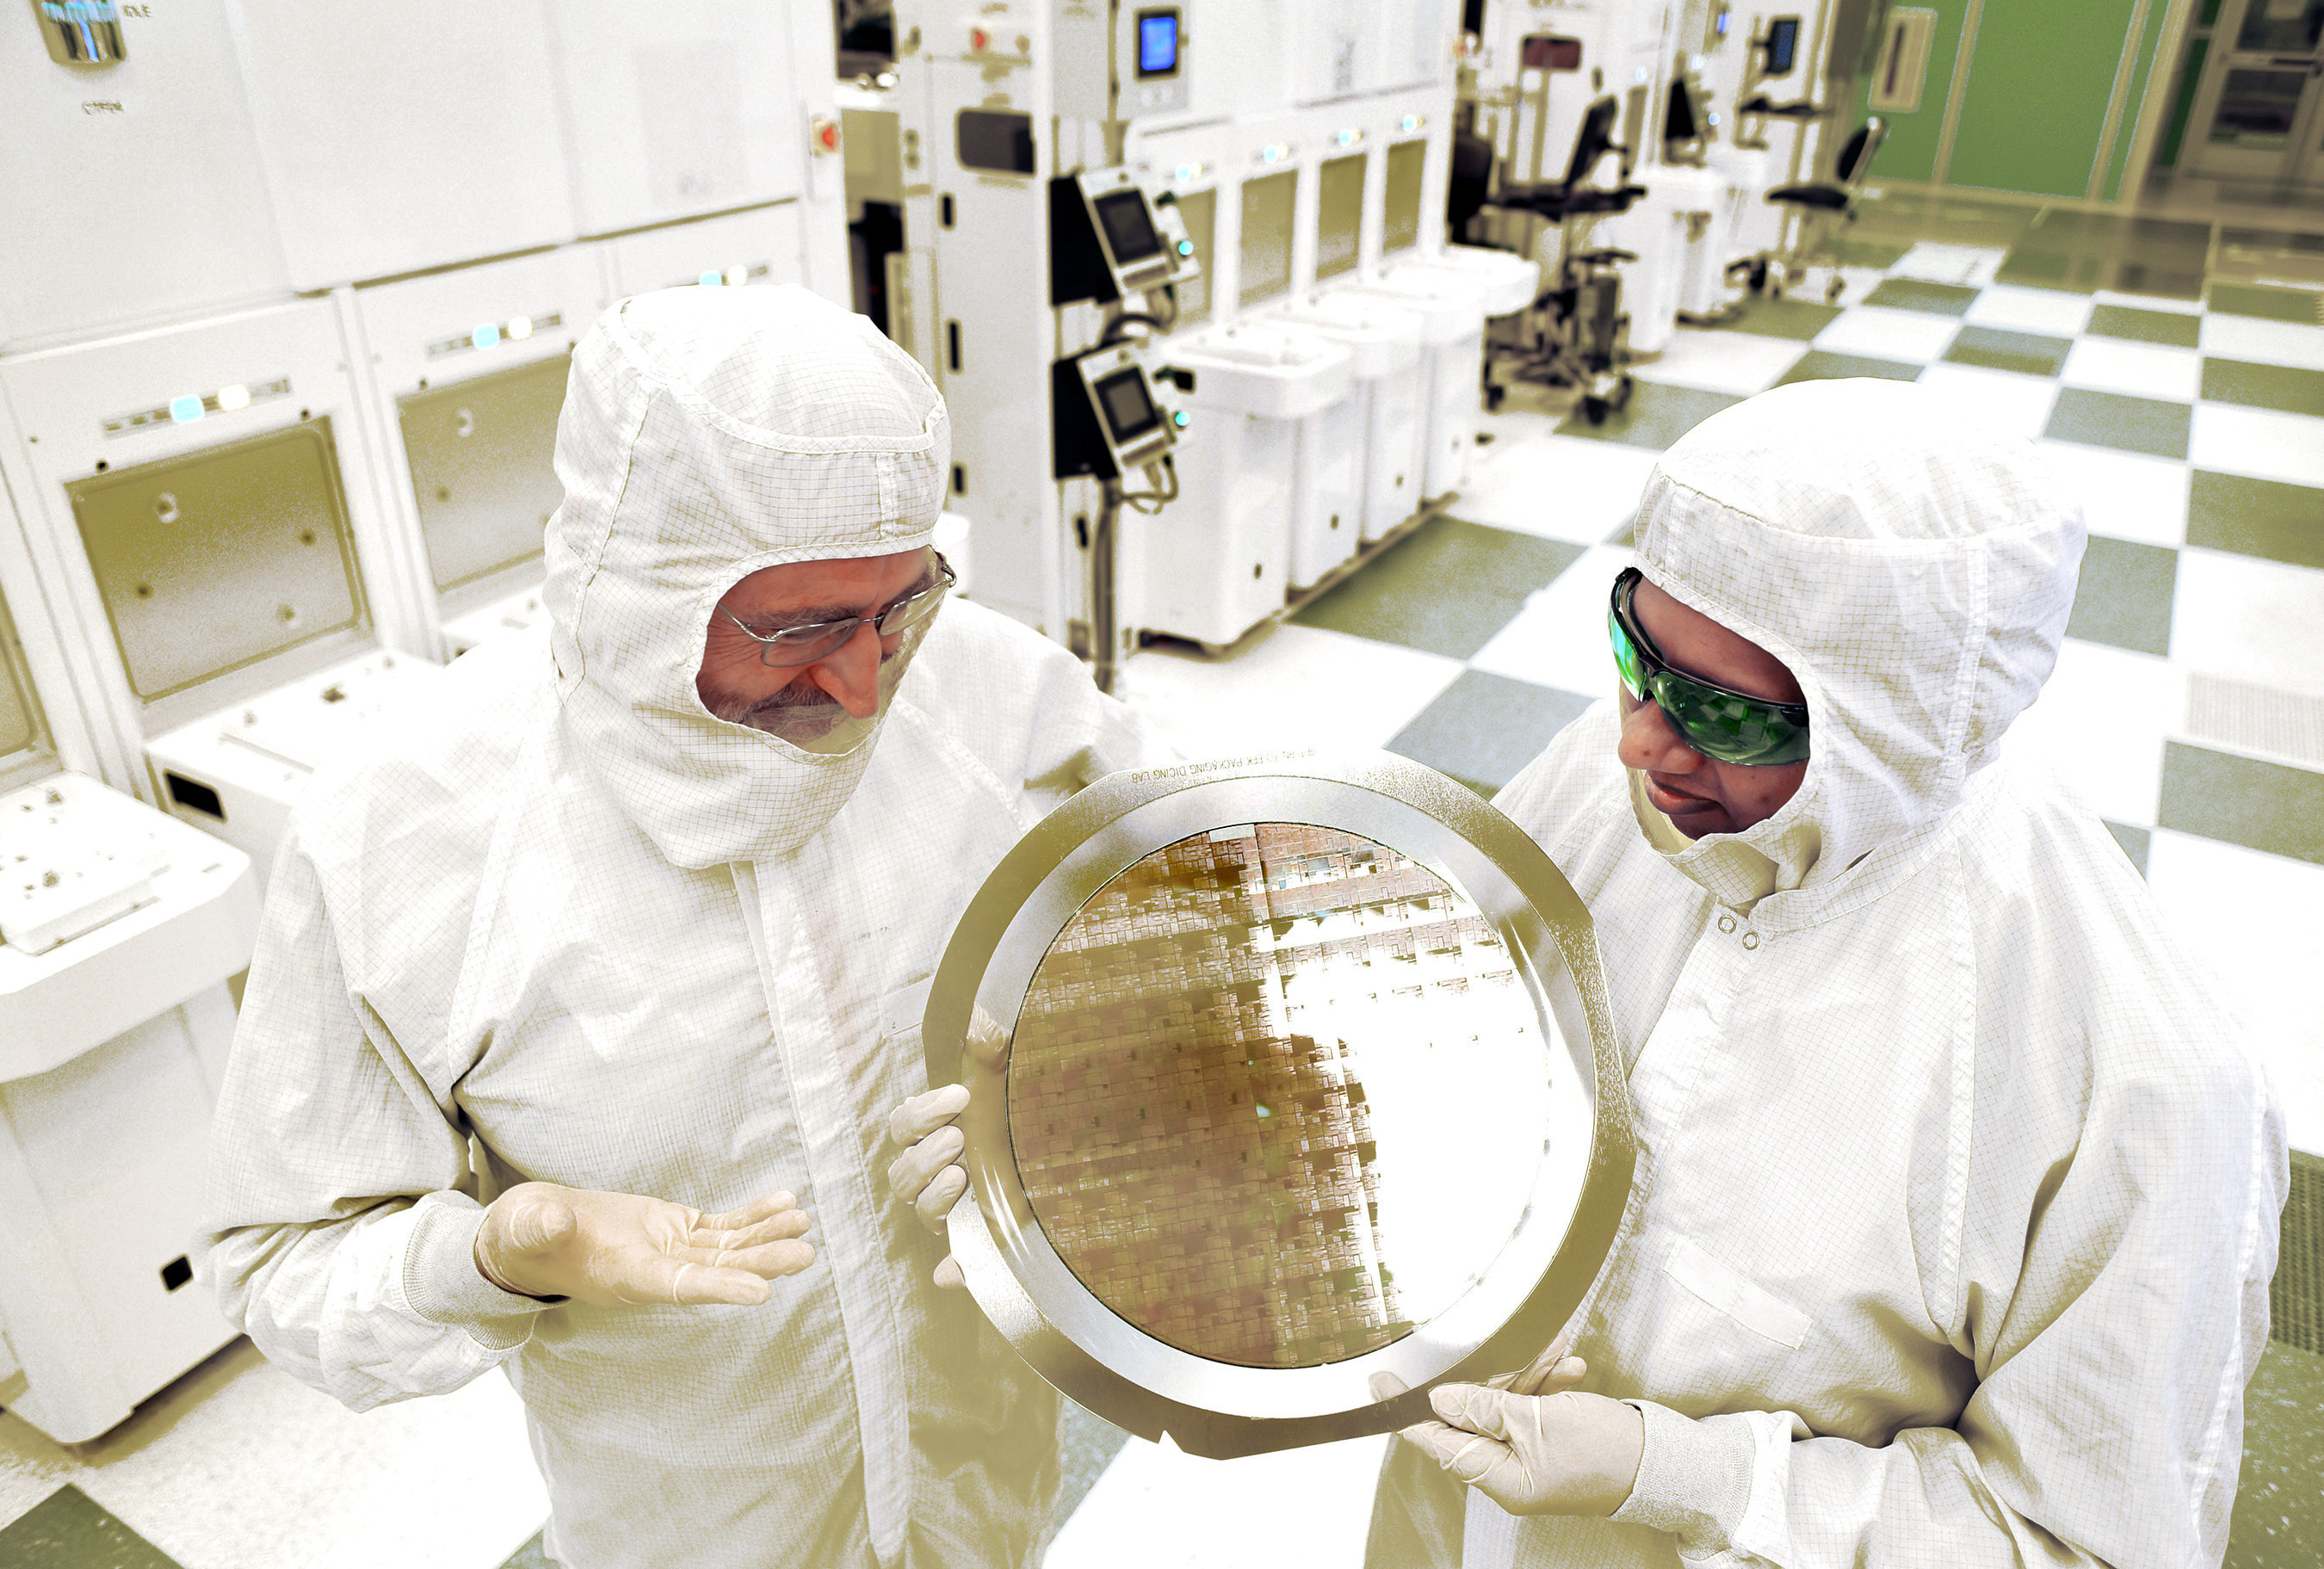 An alliance led by IBM Research has produced the semiconductor industry's first 7nm (nanometer) node test chips with functional transistors. The breakthrough, accomplished at SUNY Polytechnic Institute's Colleges of Nanoscale Science and Engineering (SUNY Poly CNSE), could result in the ability to place more than 20 billion tiny switches -- transistors -- on the fingernail-sized chips that power everything from smartphones to spacecraft. Dr. Michael Liehr (left) of SUNY Poly CNSE and Bala Haran (right) of IBM Research inspect a wafer comprised of 7nm (nanometer) node test chips in a clean room in Albany, NY.